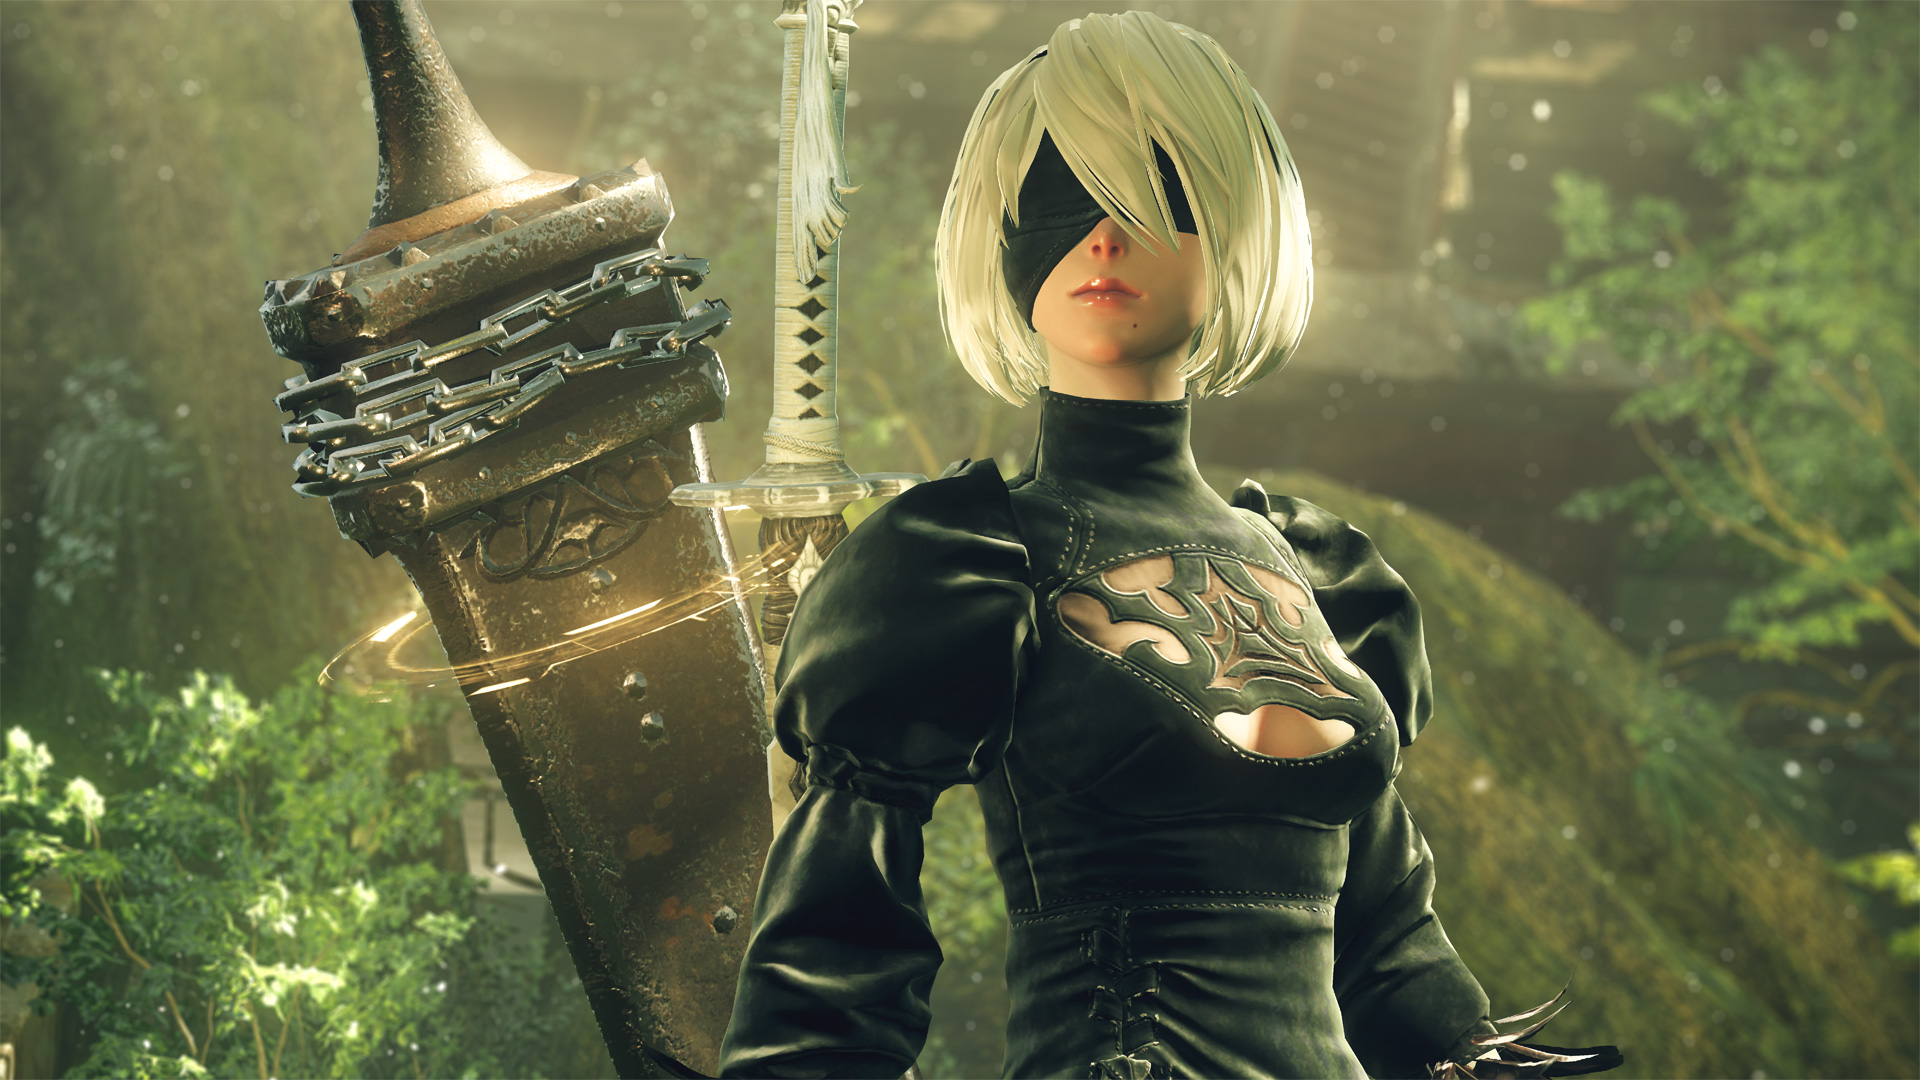 NieR:Automata is getting an upgrade patch